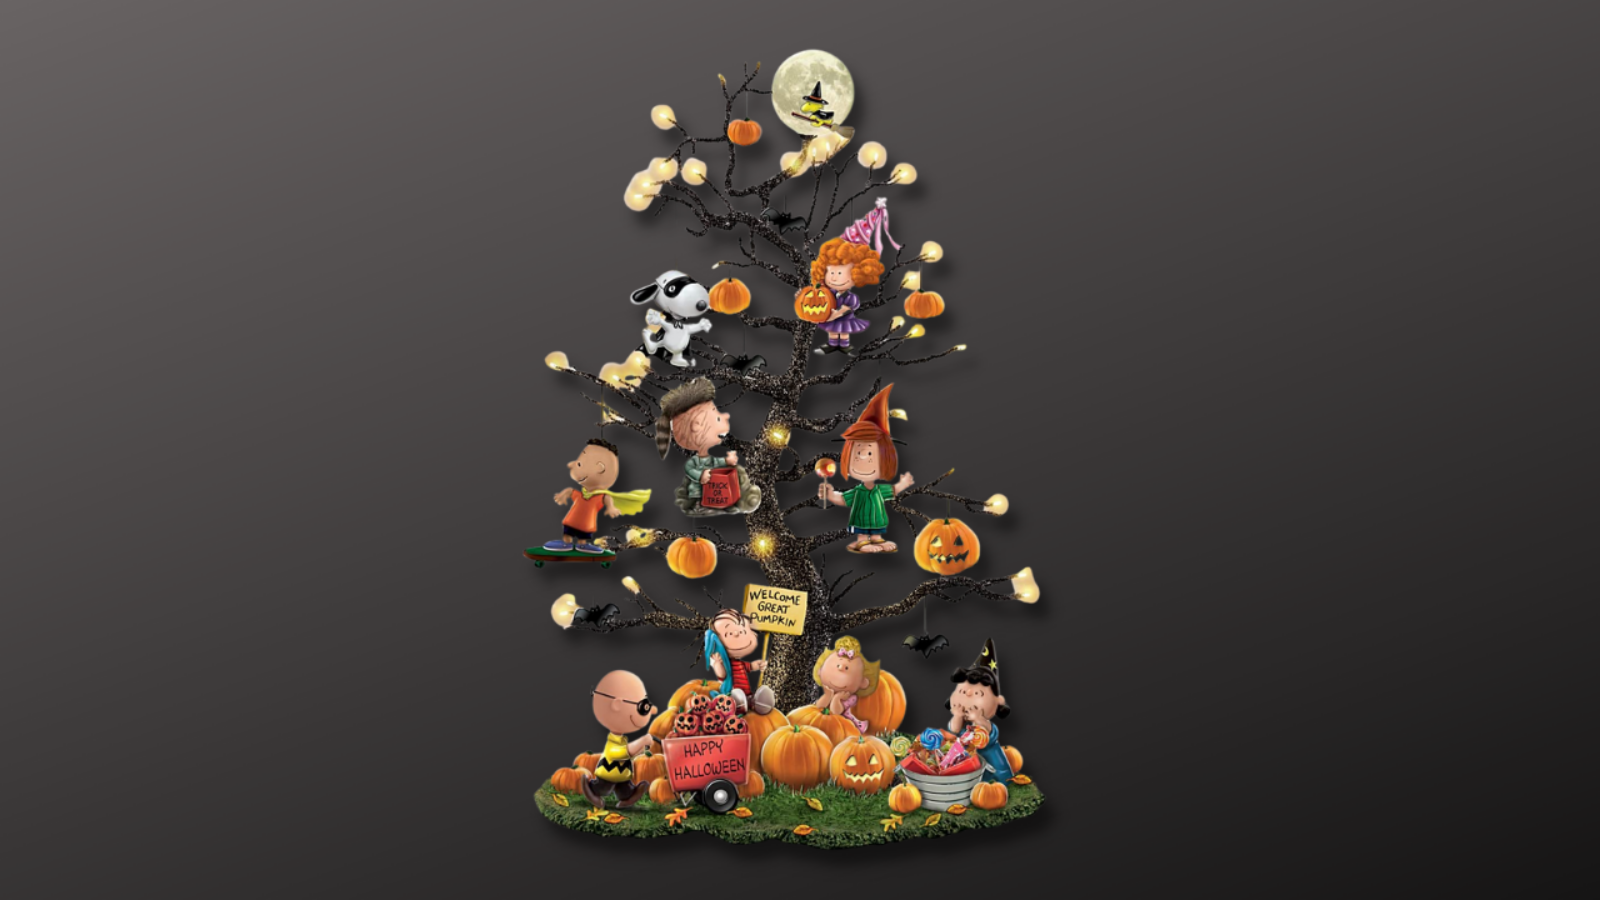 Celebrate Halloween with Charlie Brown!